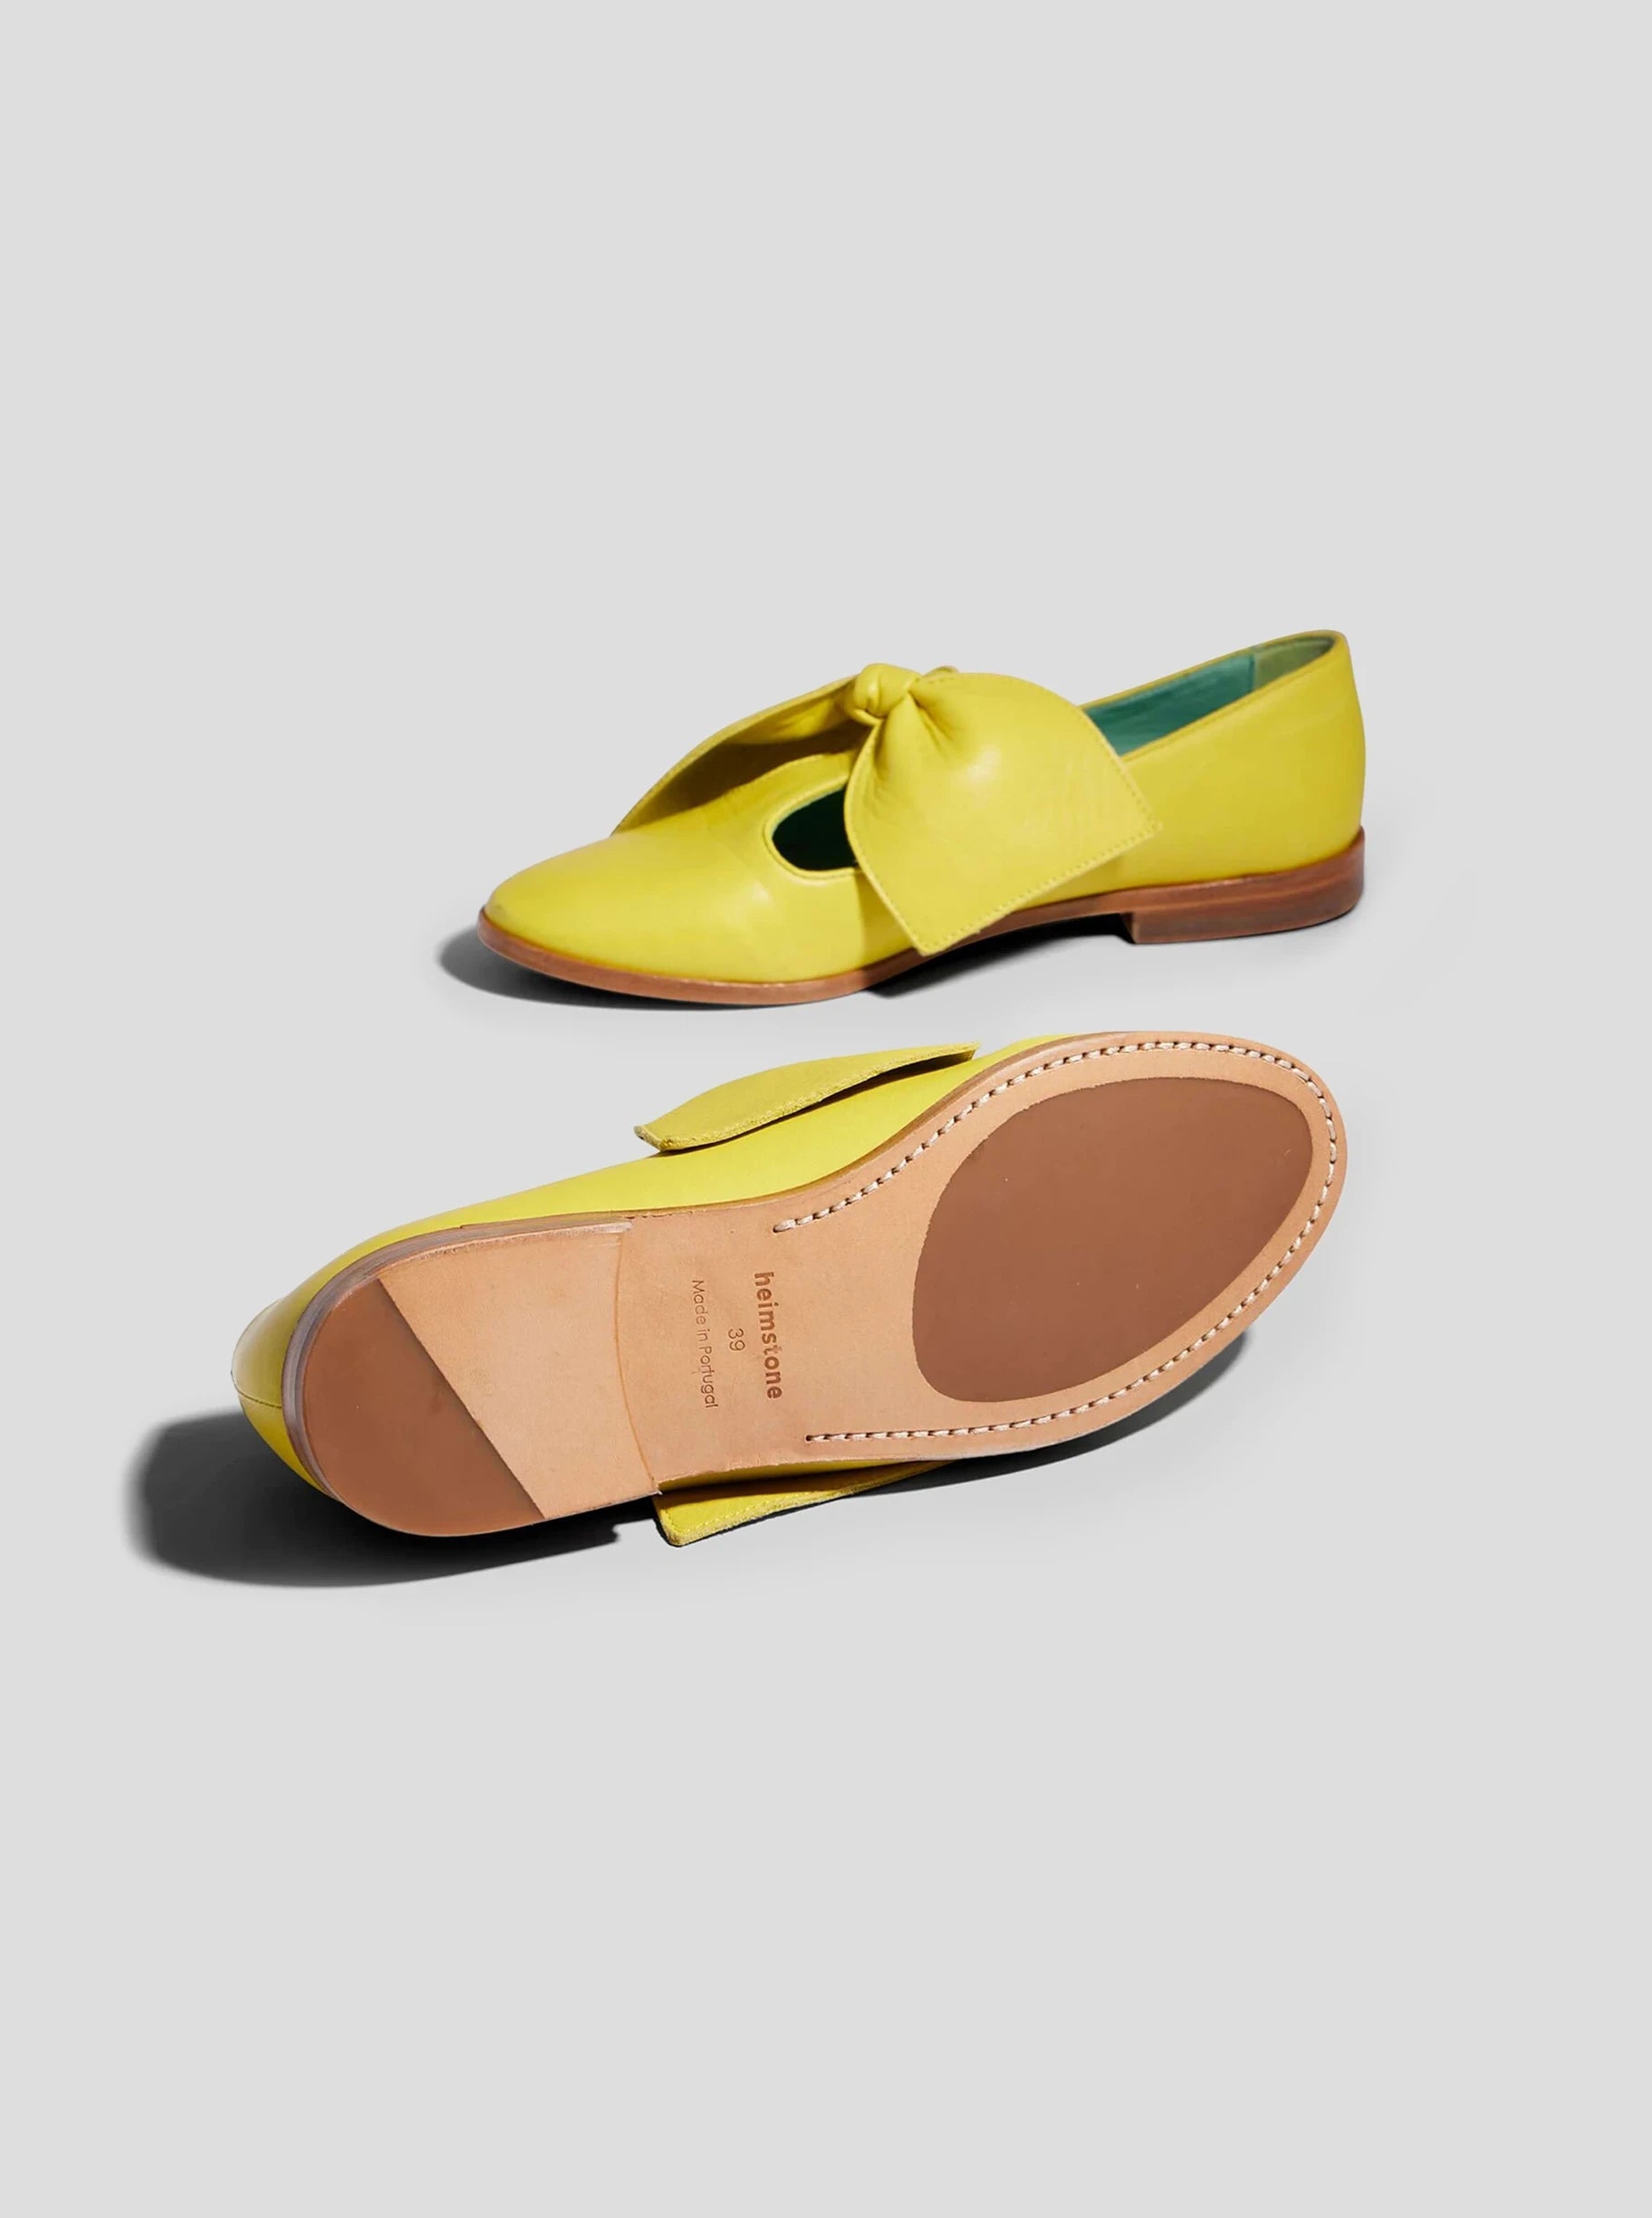 BB Ballerina Shoes in Yellow Leather